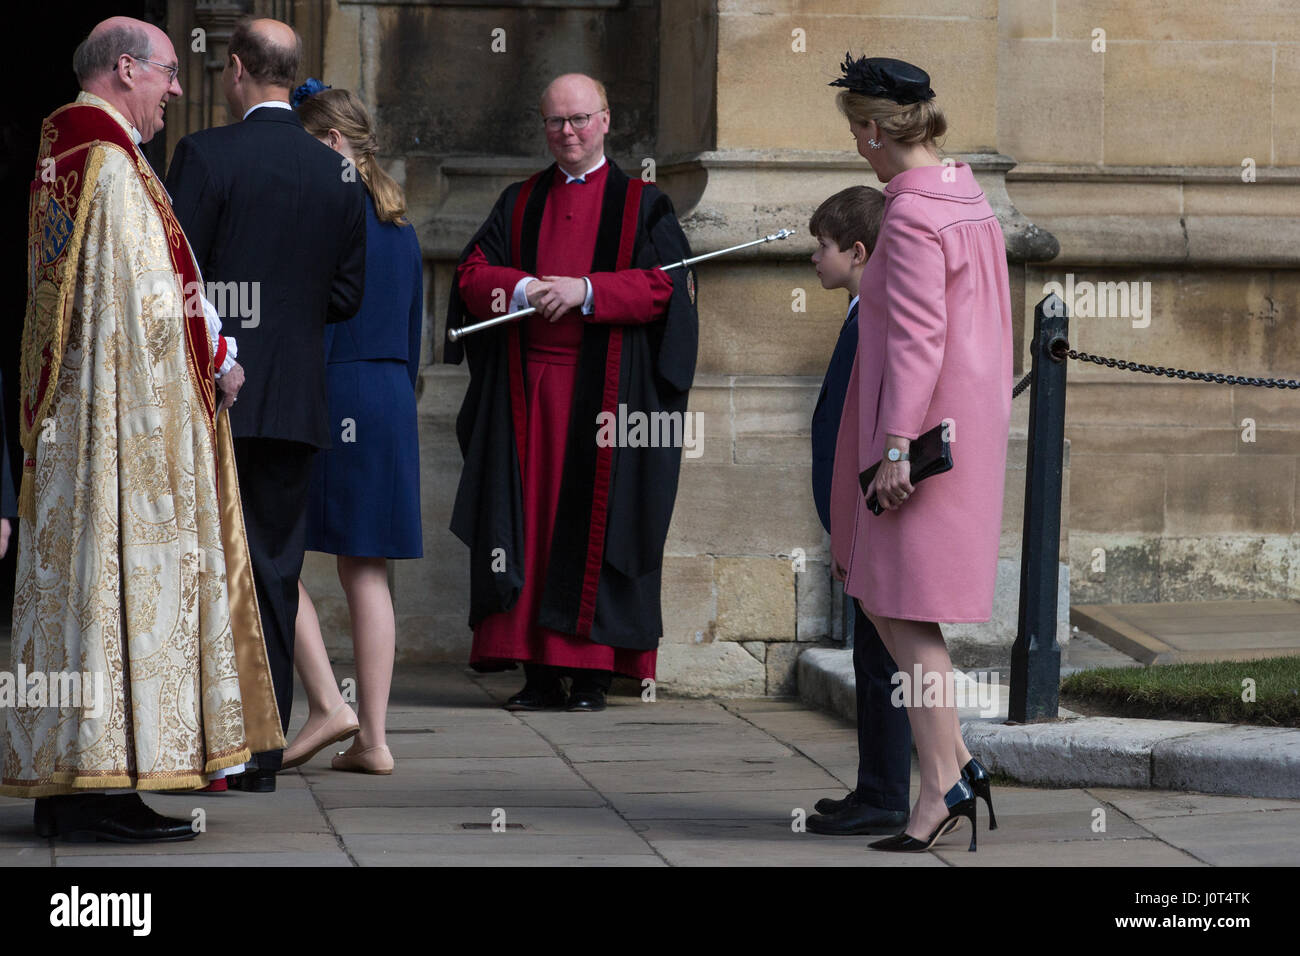 Windsor, UK. 16th April, 2017. The Countess of Wessex and her son, James, Viscount Severn, are greeted by the Dean of Windsor, the Rt Revd David Conner KCVO, upon arrival for the Easter Sunday service at St George's Chapel in Windsor Castle. Credit: Mark Kerrison/Alamy Live News Stock Photo